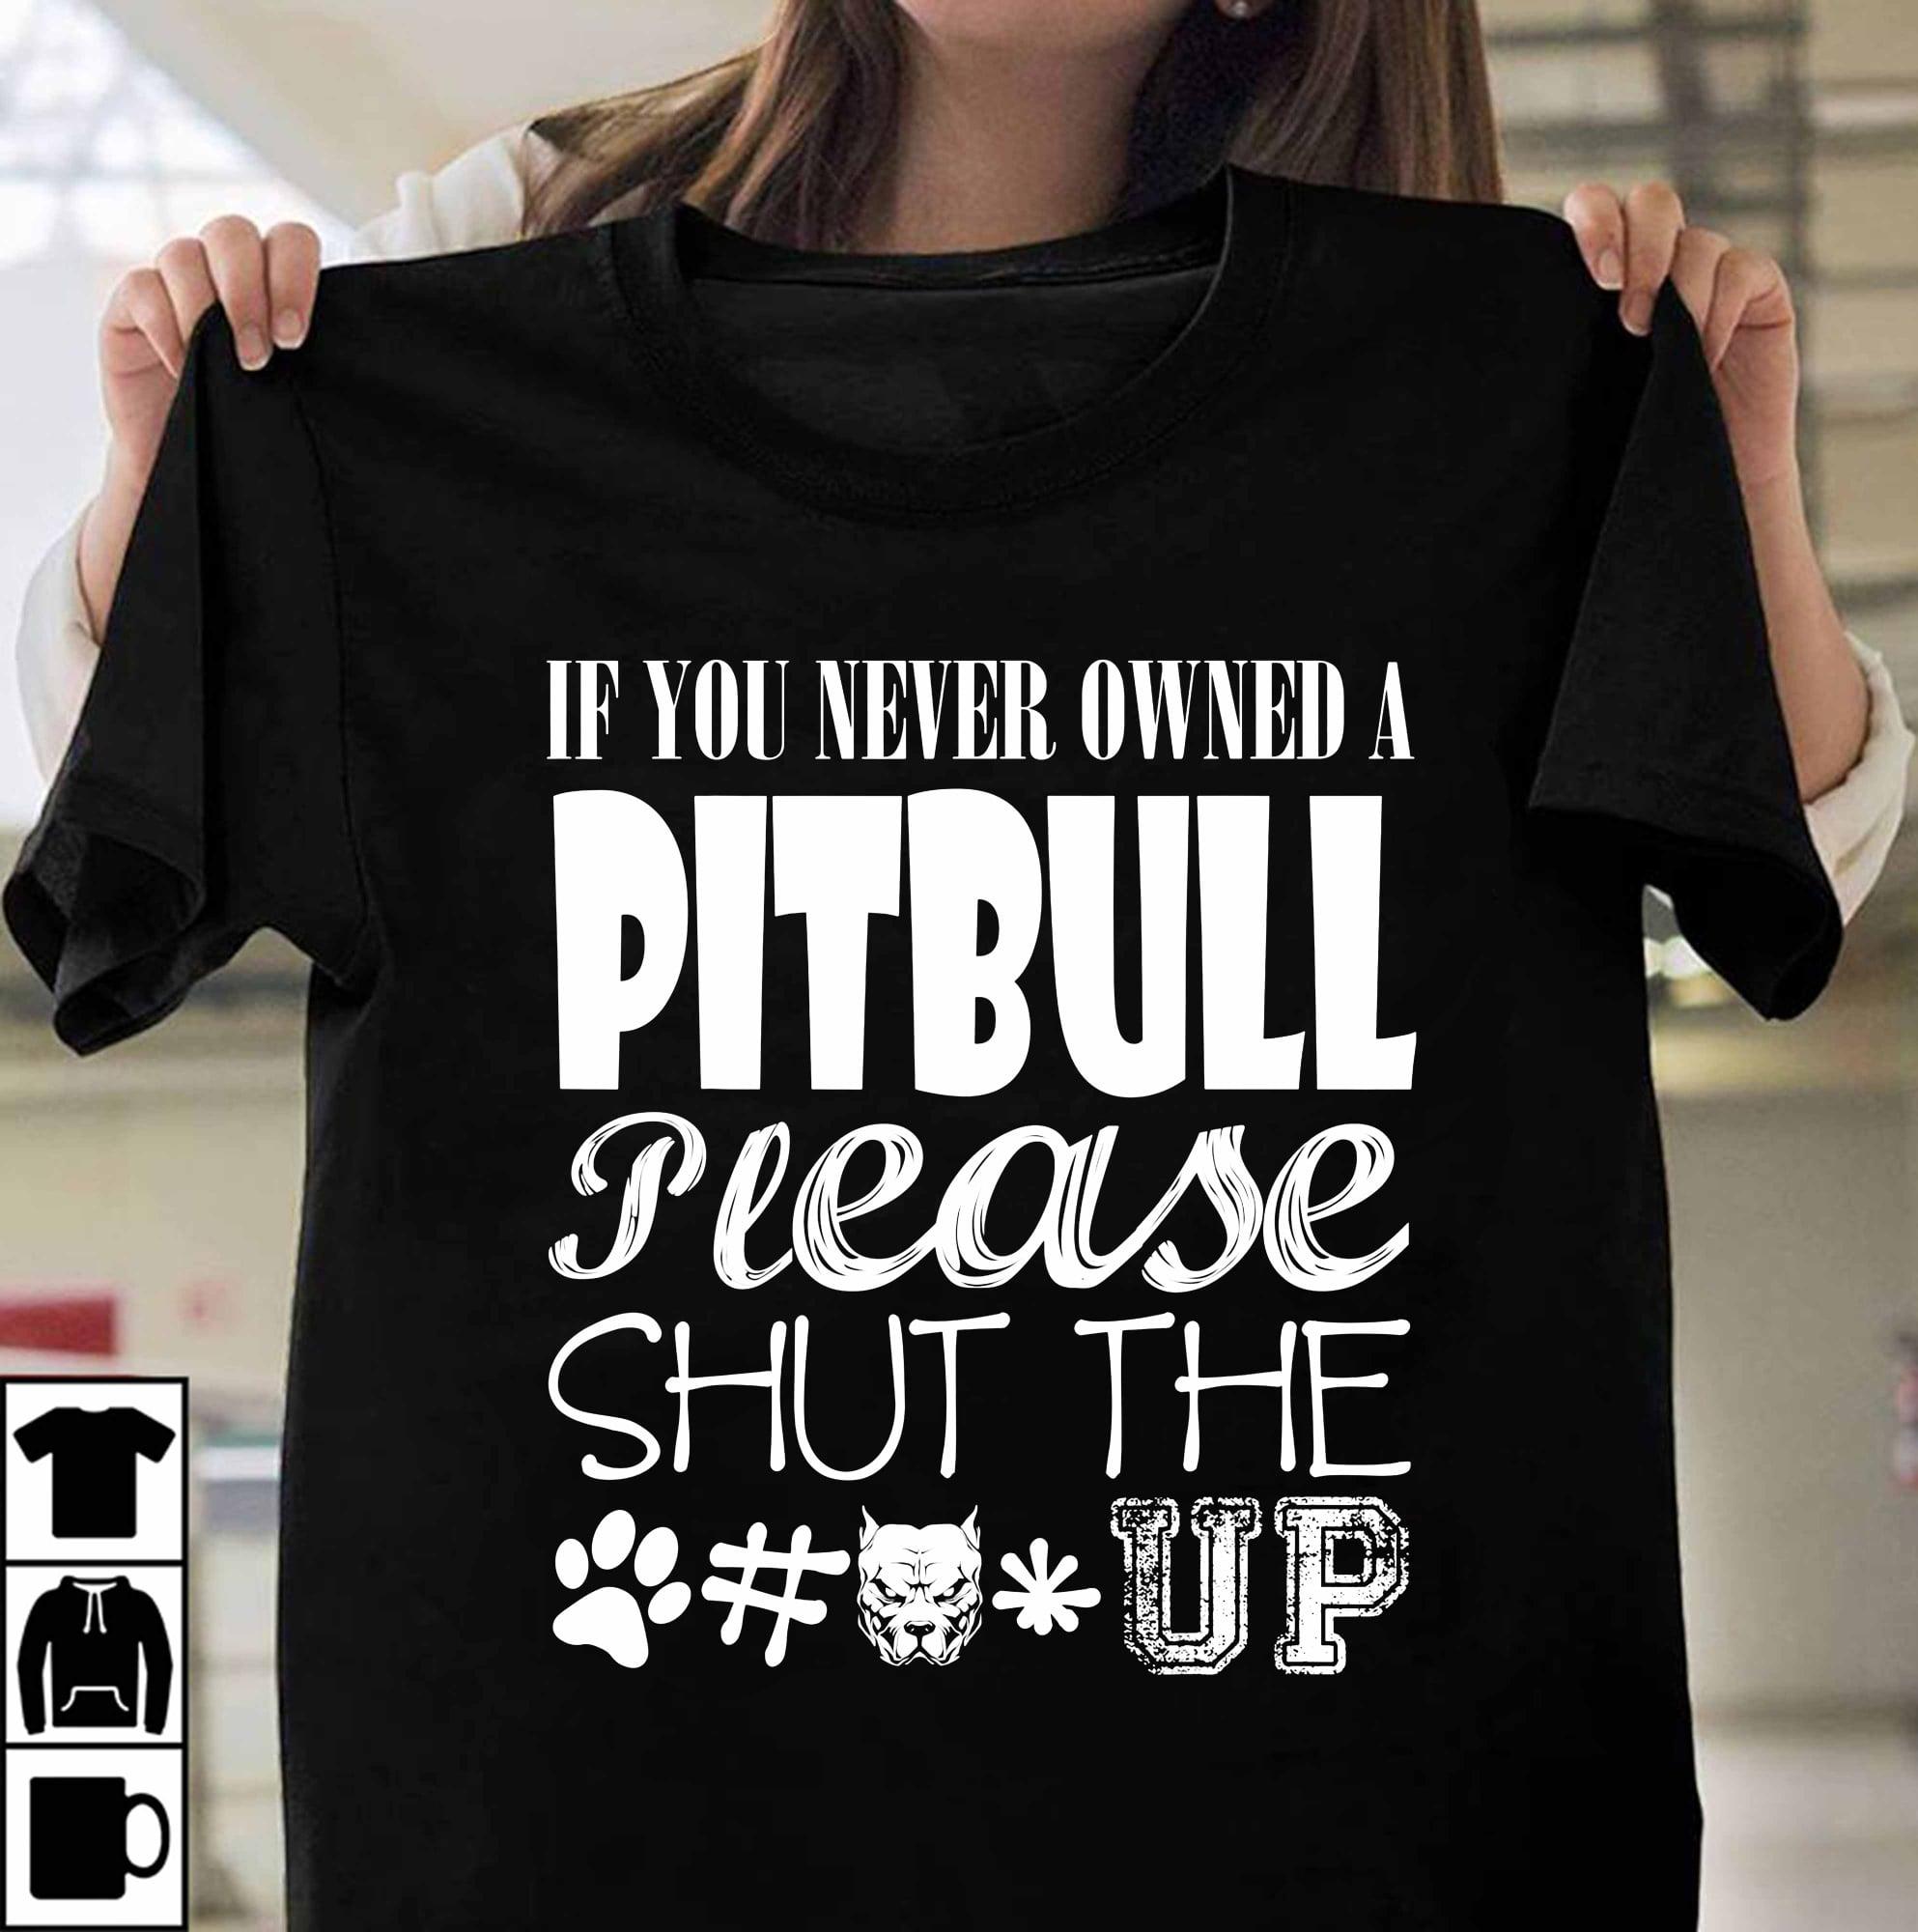 If you never owned a Pitbull please shut the fuck up - Pitbull owner gift, dog lover T-shirt